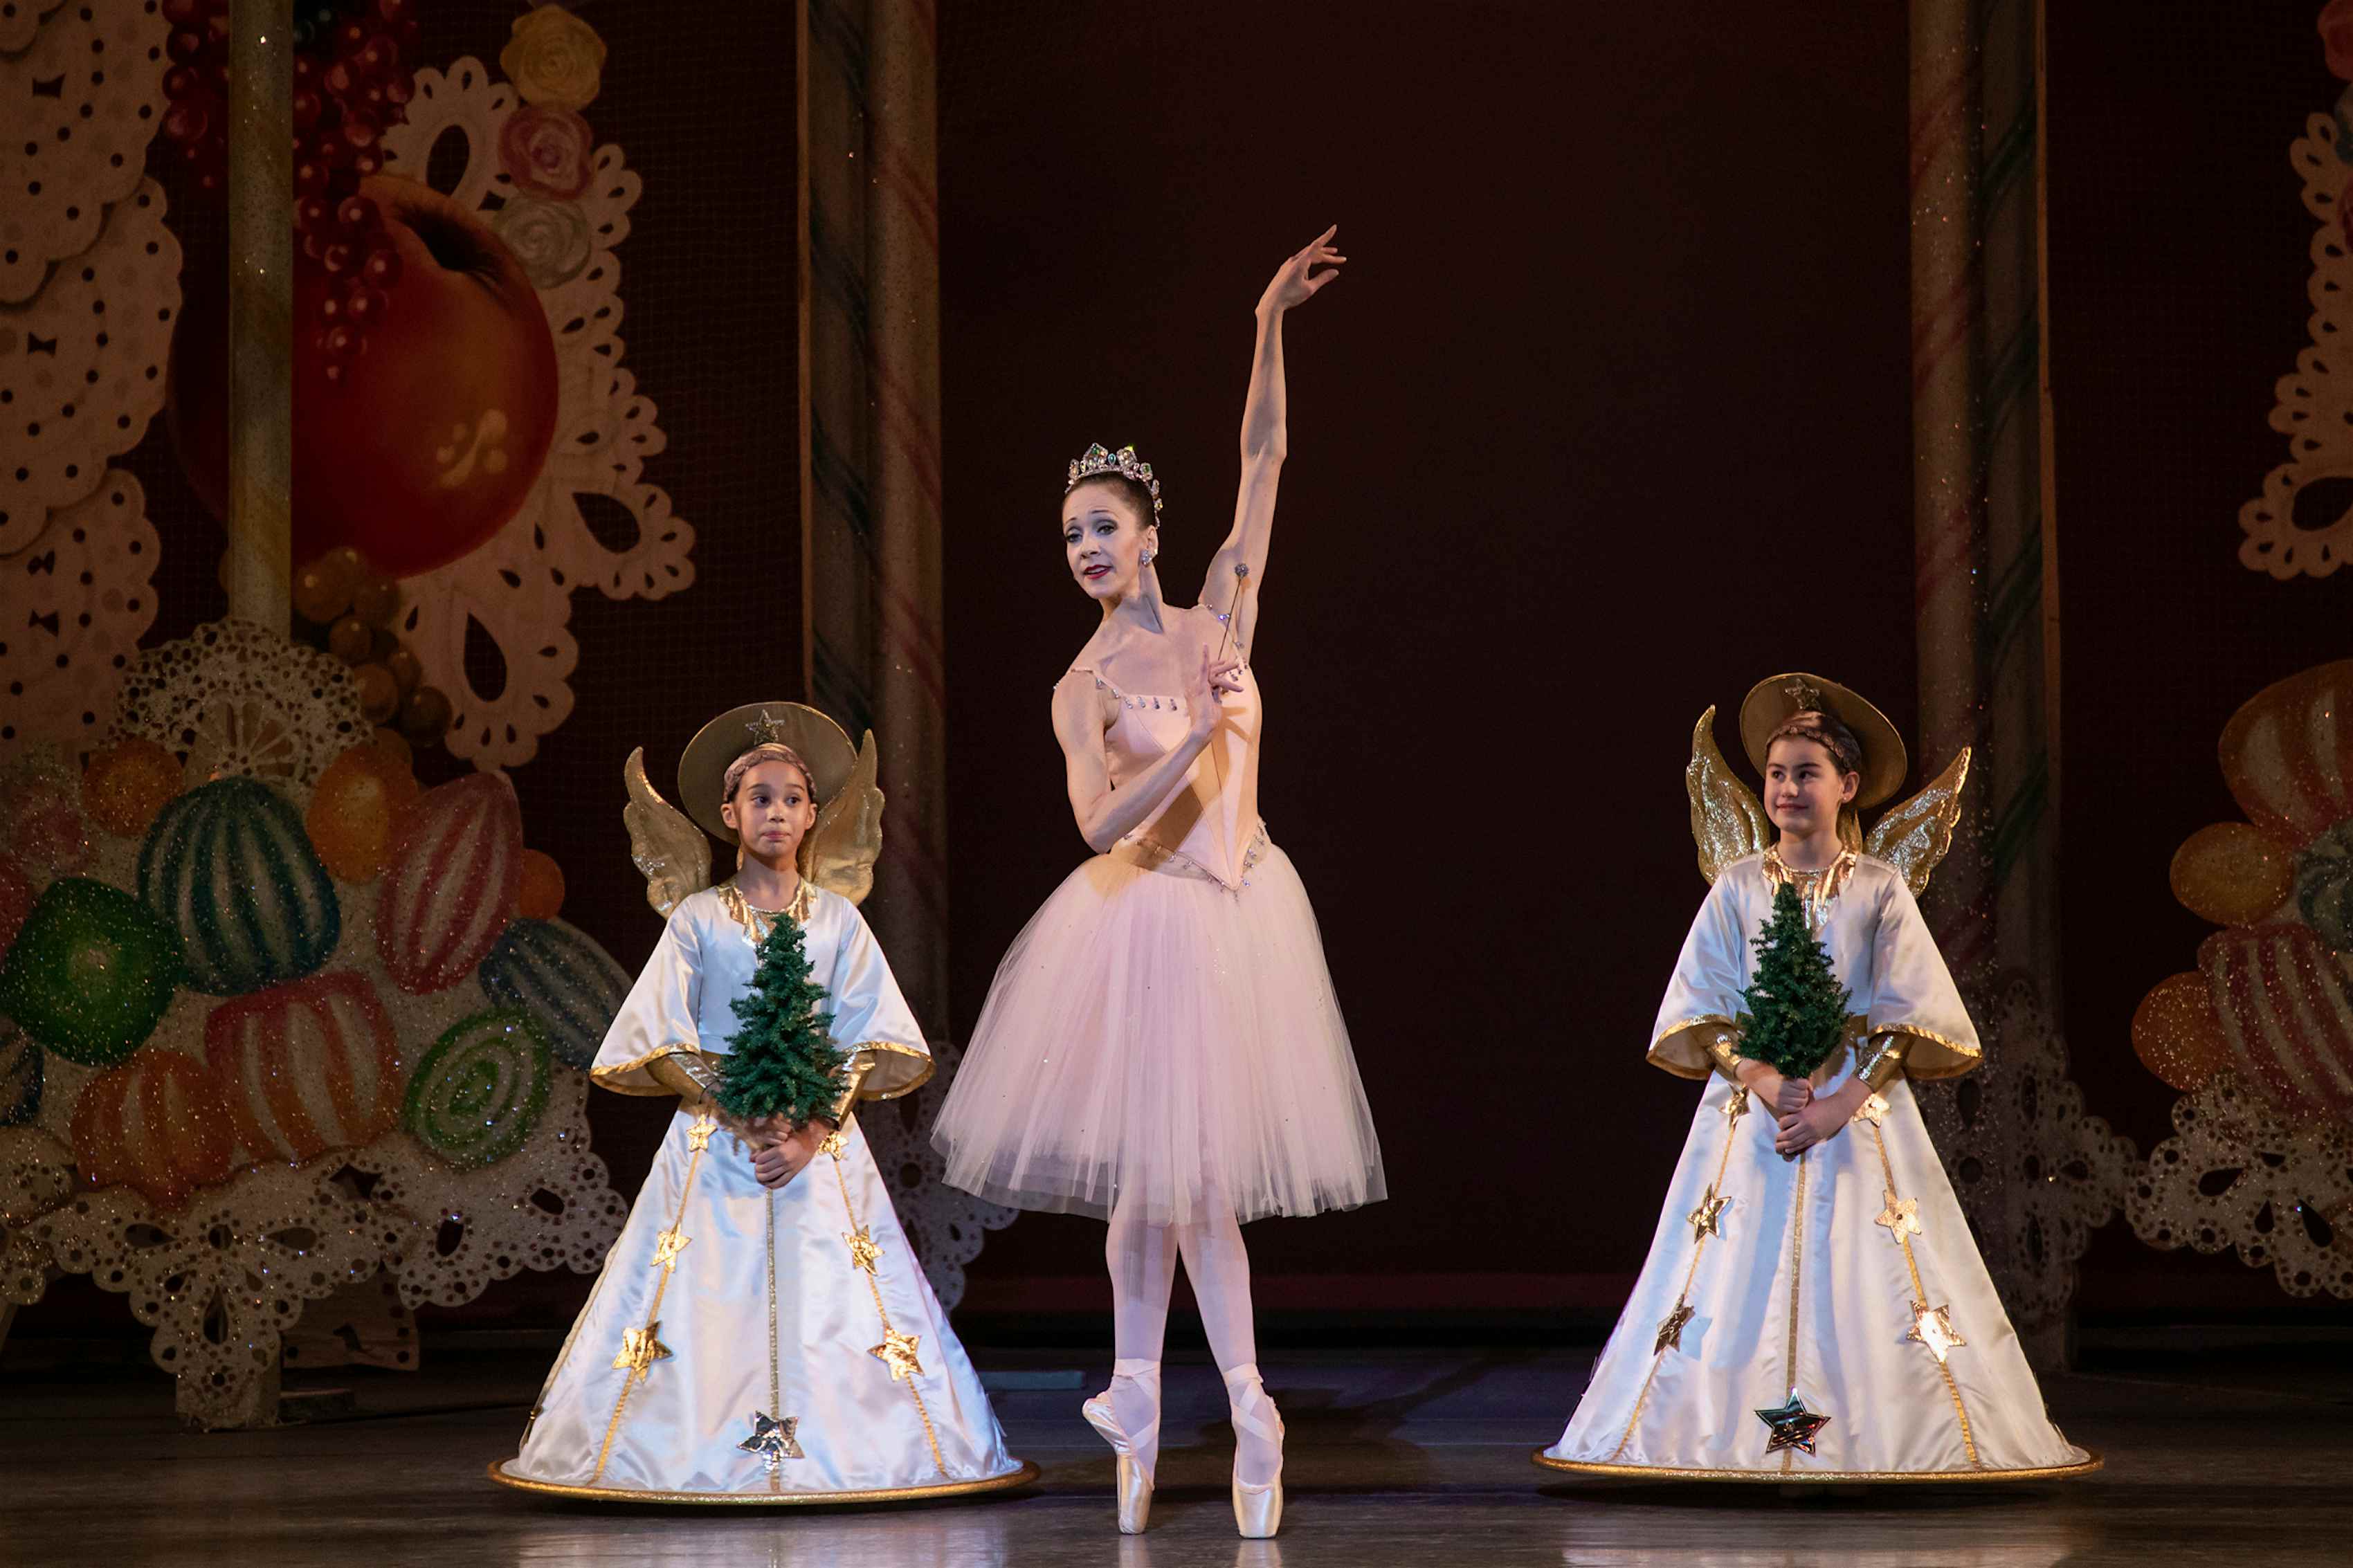 Get in the Christmas spirit by streaming the New York City Ballet’s